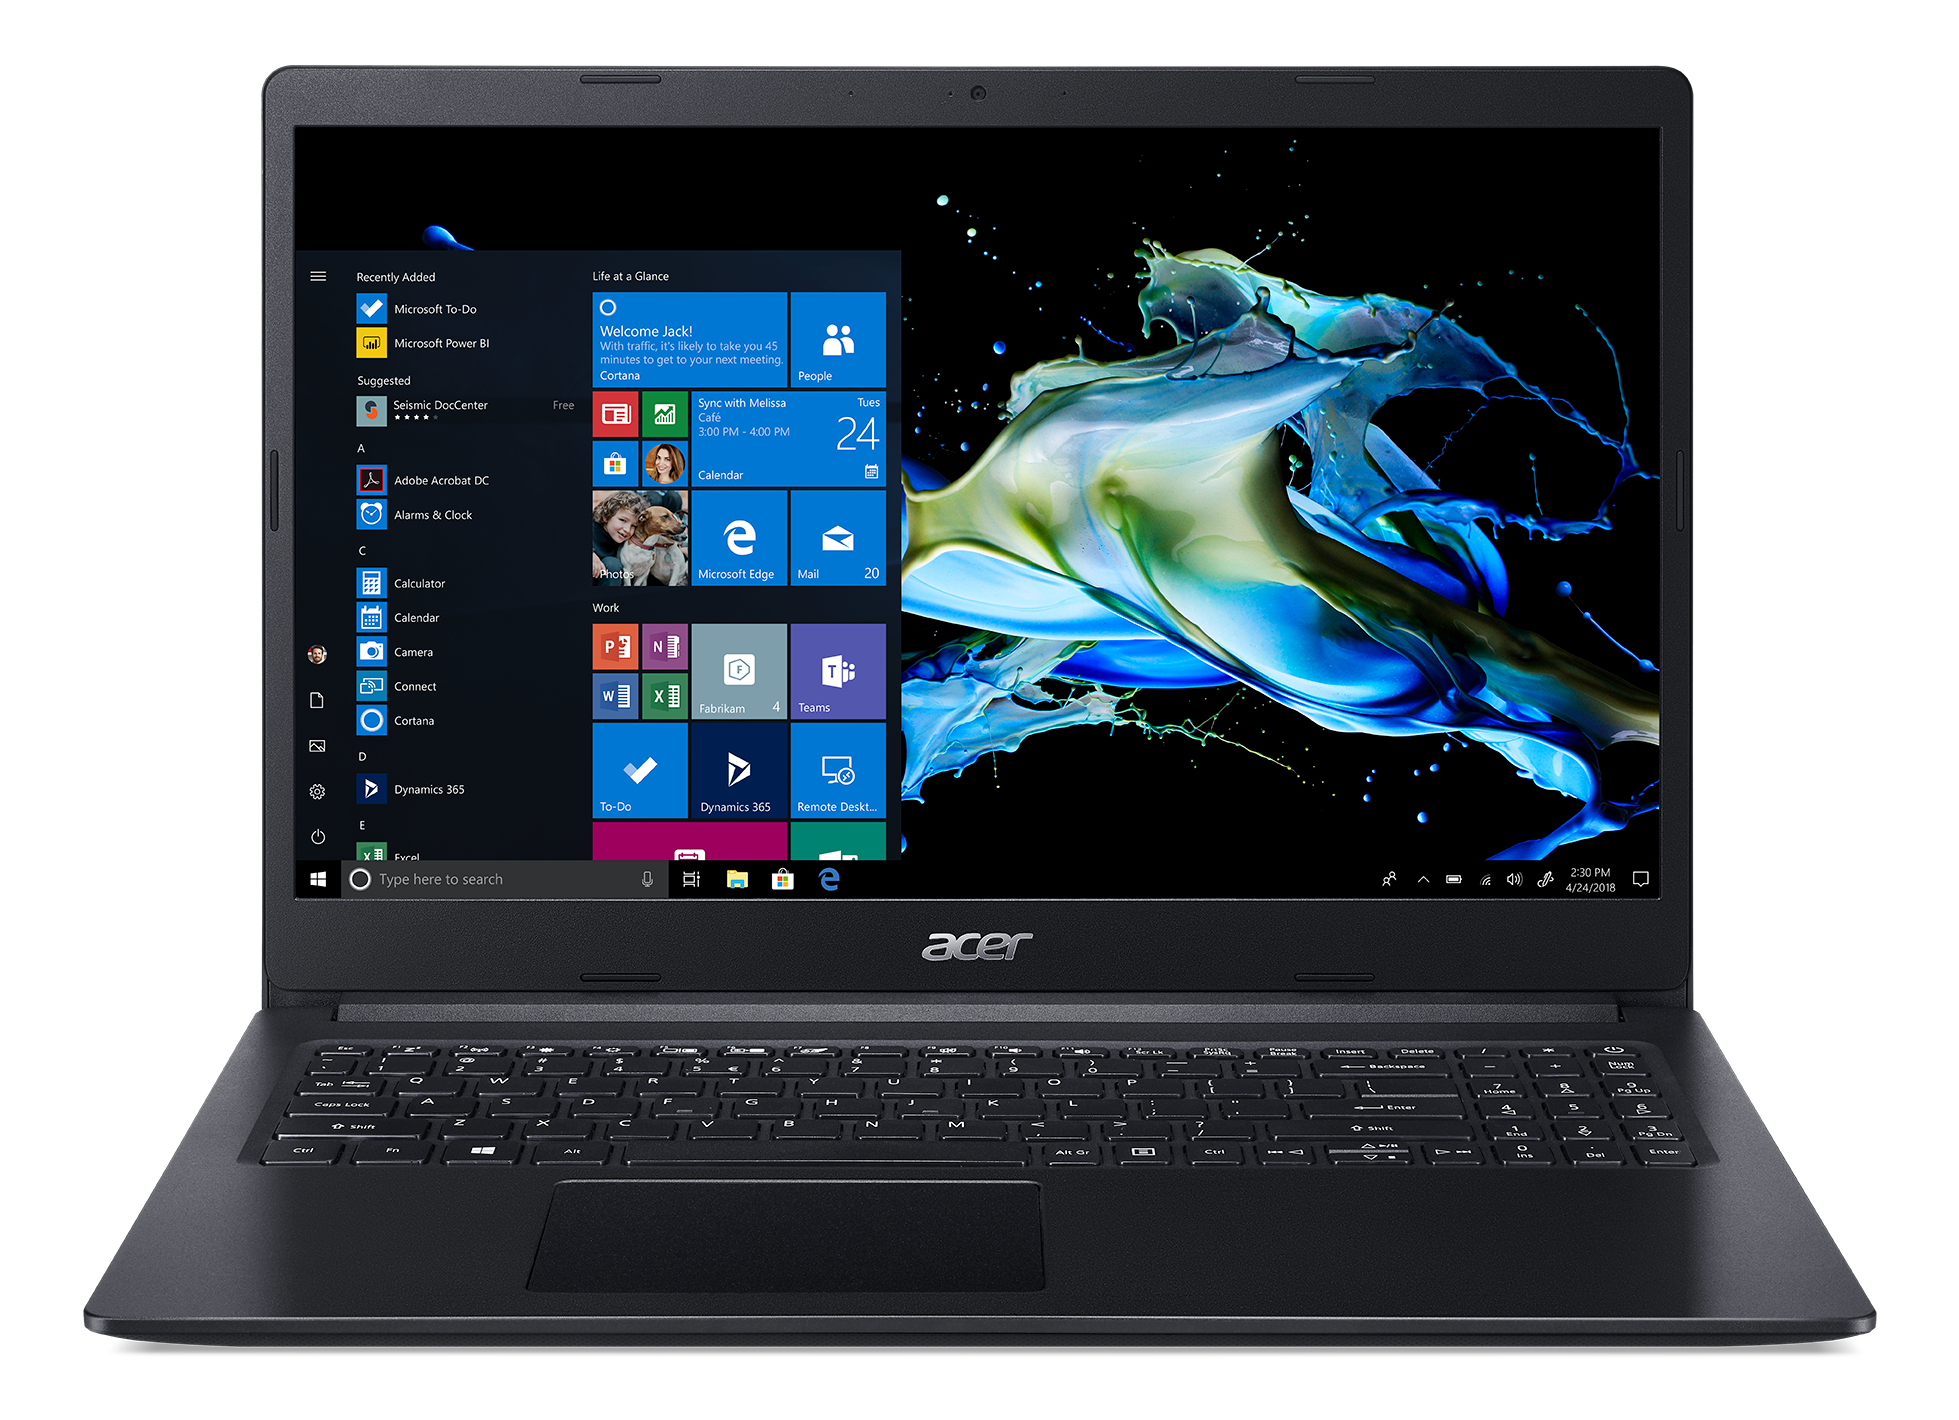 Acer Extensa 15 EX215-31-C8MV, 15.6I FHD ComfyView, Celeron N4020, 4GB DDR4, 128GB PCIe NVMe SSD, UHD Graphics 600, Win10Home S-Mode, QWERTY, Shale Black